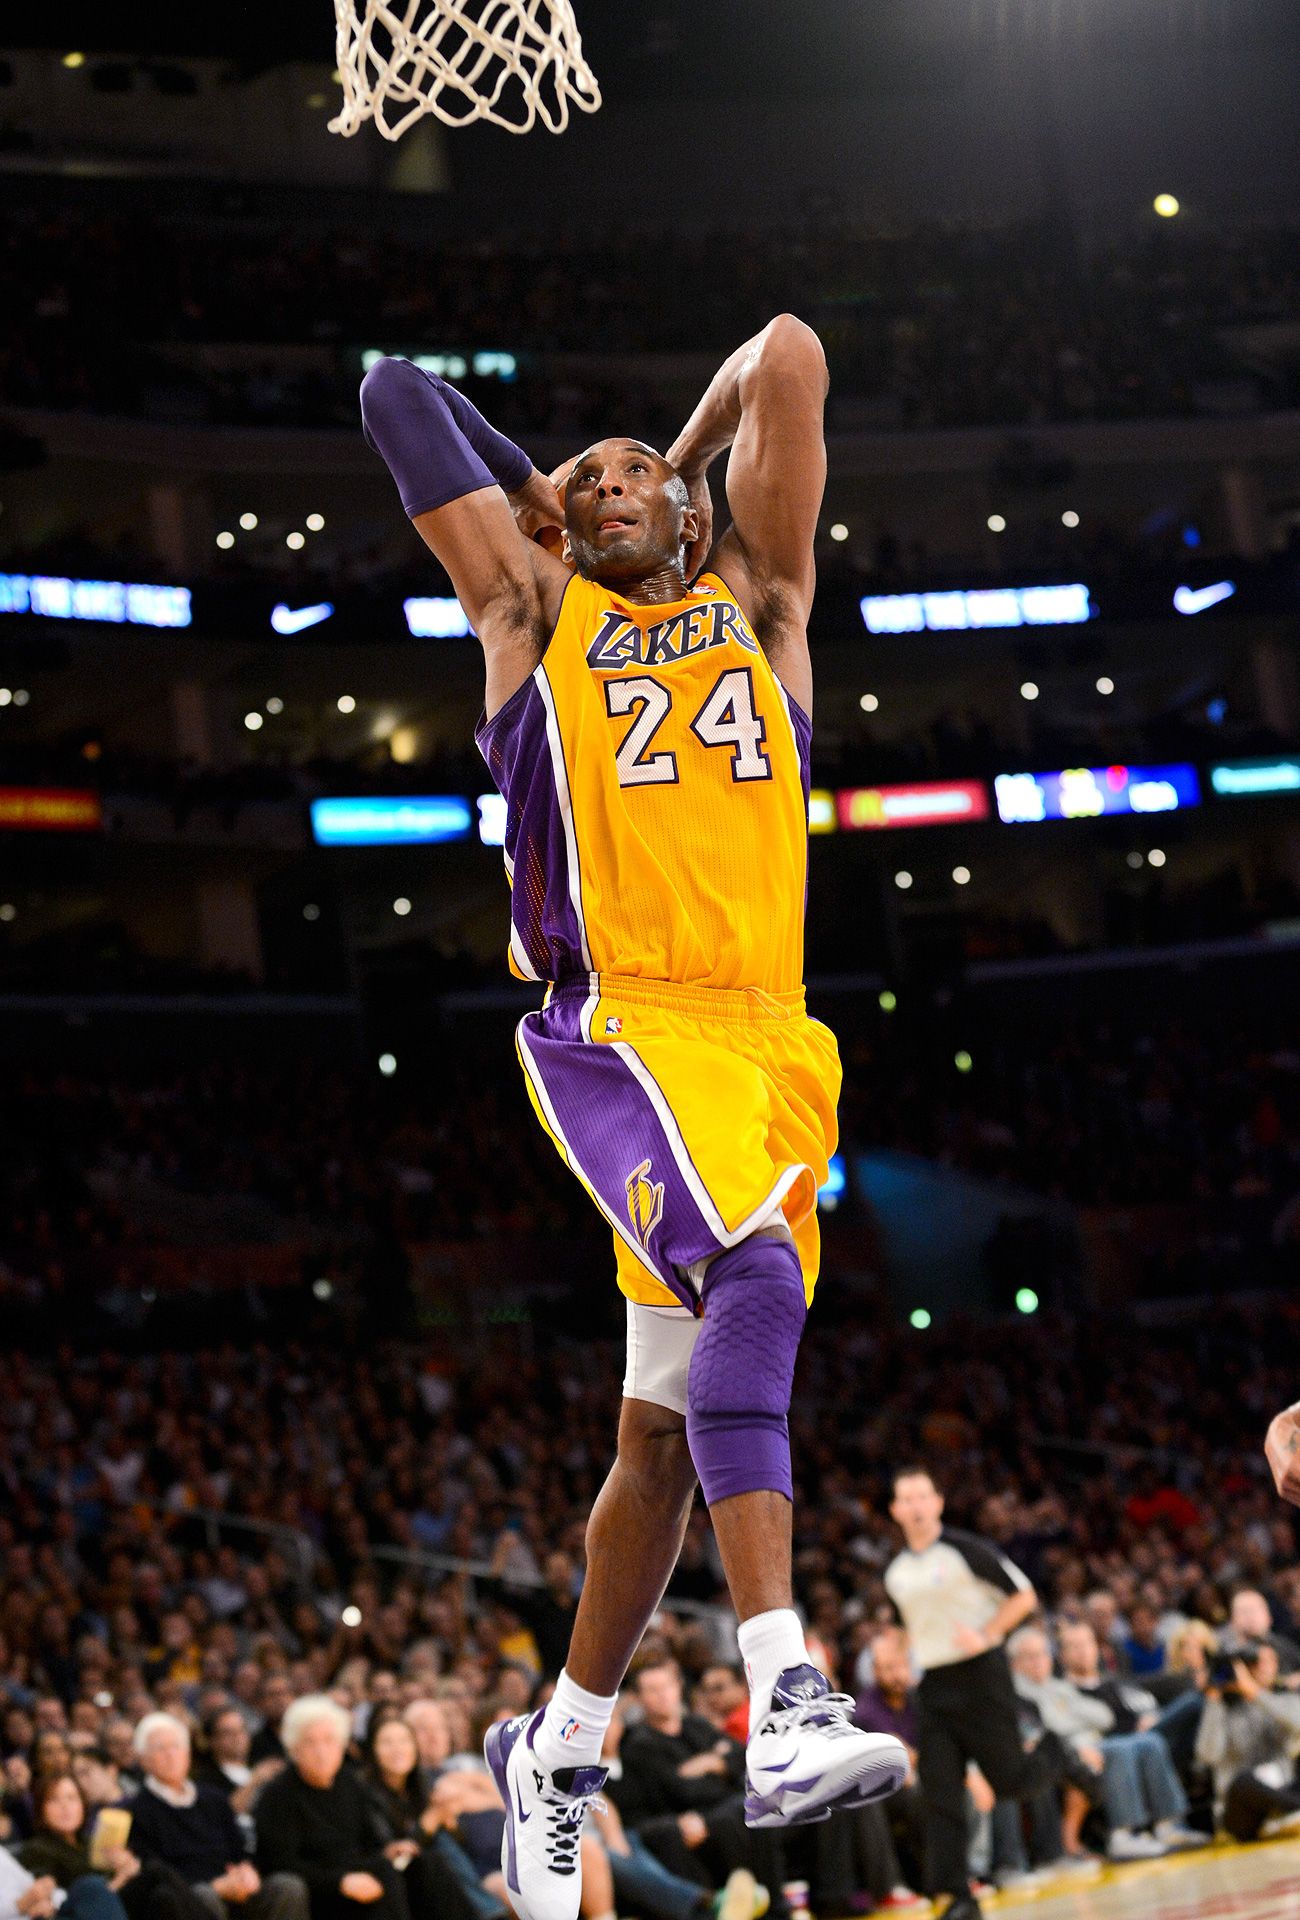 Free download Kobe Bryant Dunk Image Crazy Gallery [1300x1920] for your Desktop, Mobile & Tablet. Explore Kobe Bryant Dunk Wallpaper. Slam Dunk Wallpaper, Kobe Bryant Wallpaper NBA Dunks Wallpaper